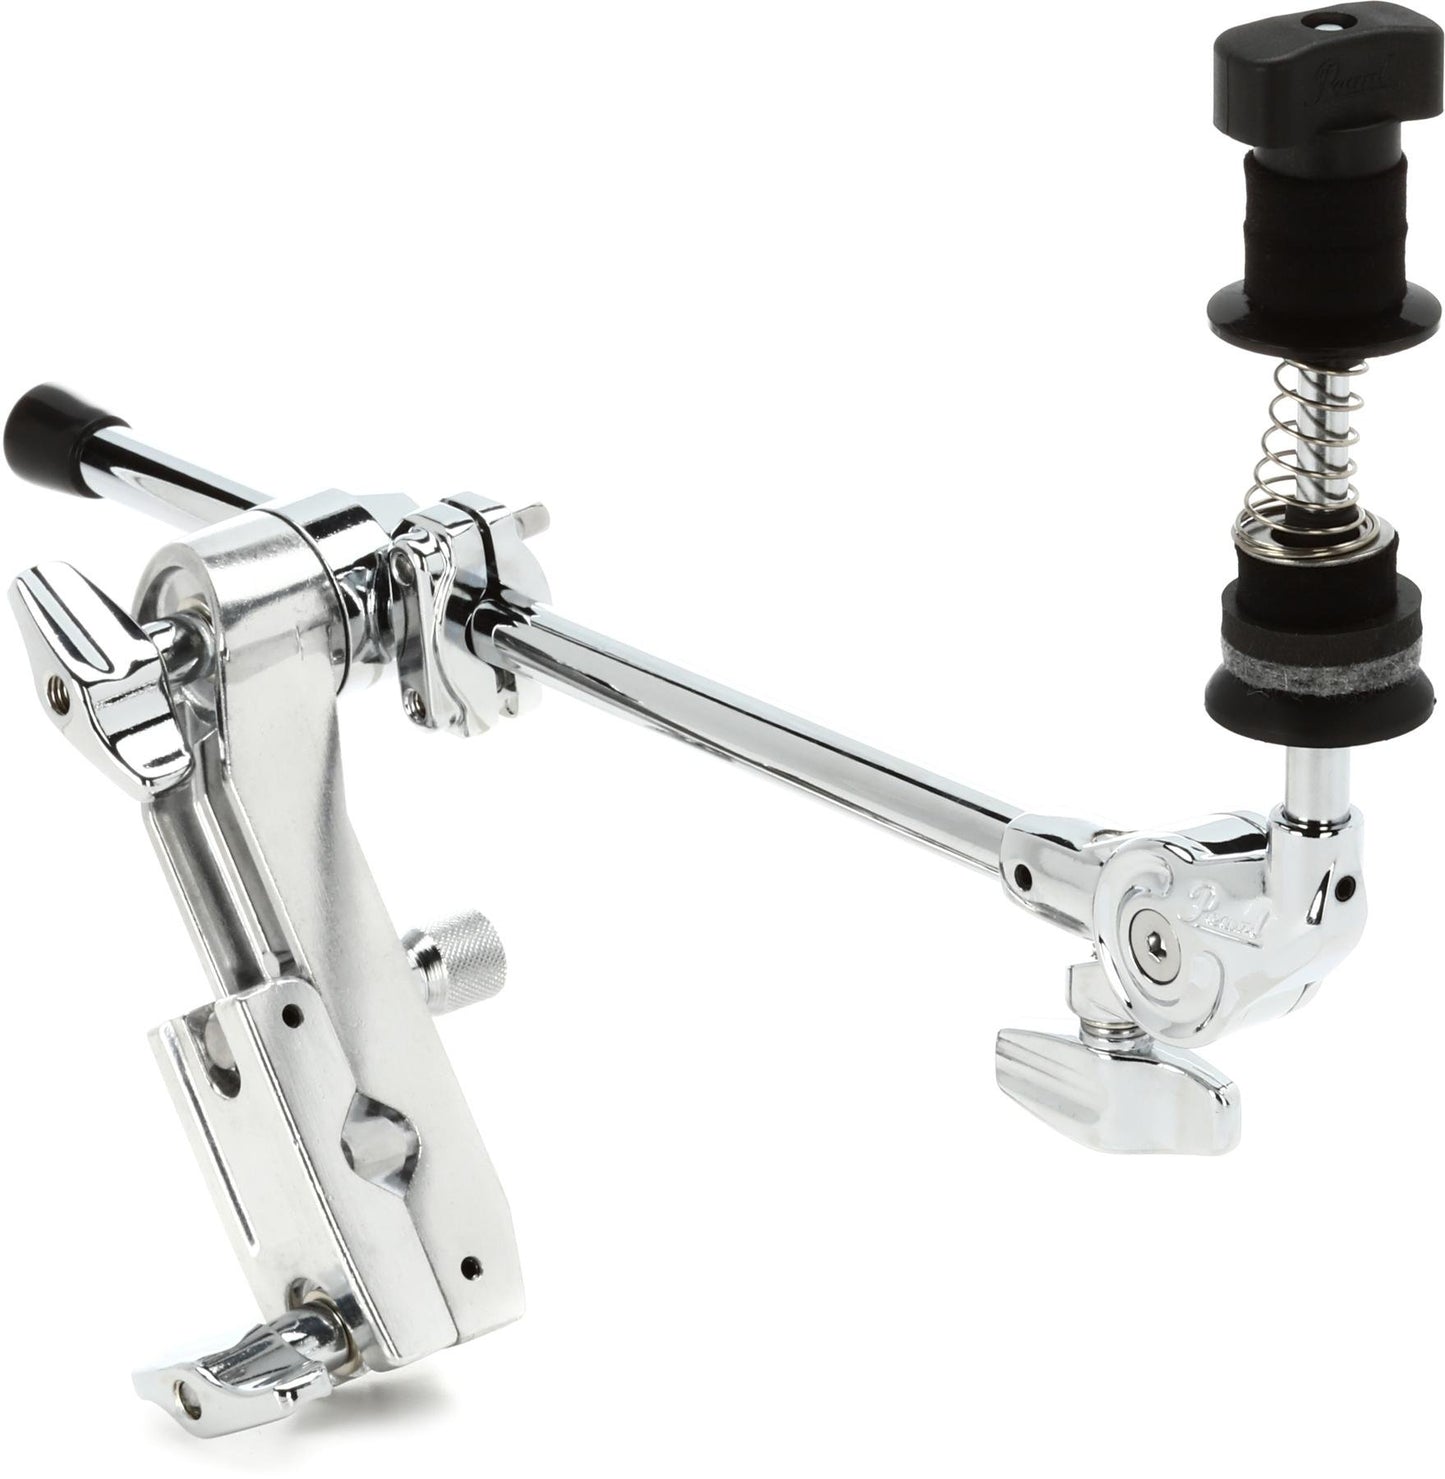 Pearl CLH70 Closed Hi-Hat Cymbals Holder with 15" Solid Boom Arm, Uni-Lock Tilter for Drum Equipment Accessory